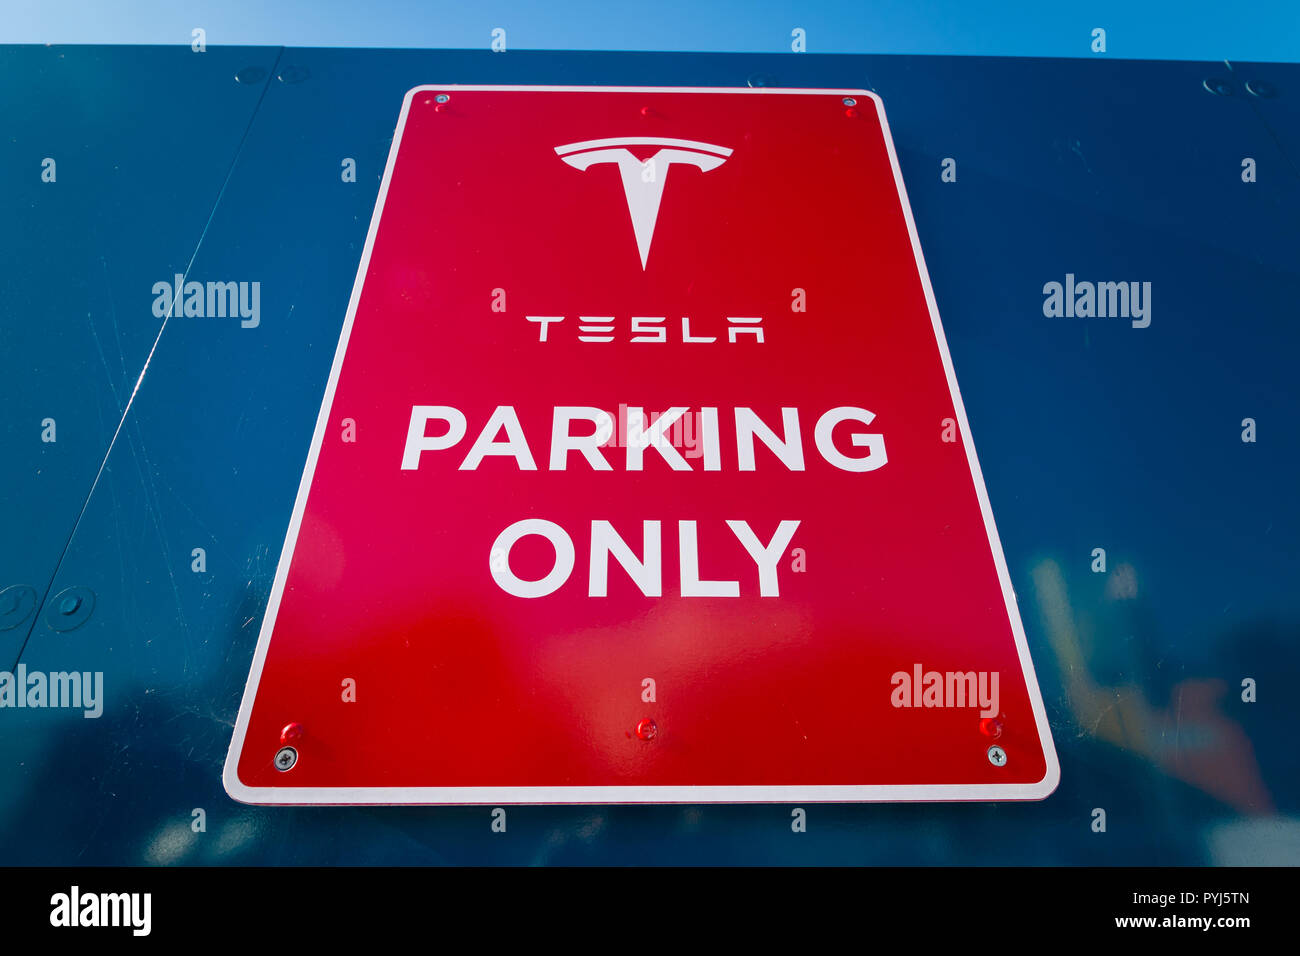 Tesla parking only sign Stock Photo